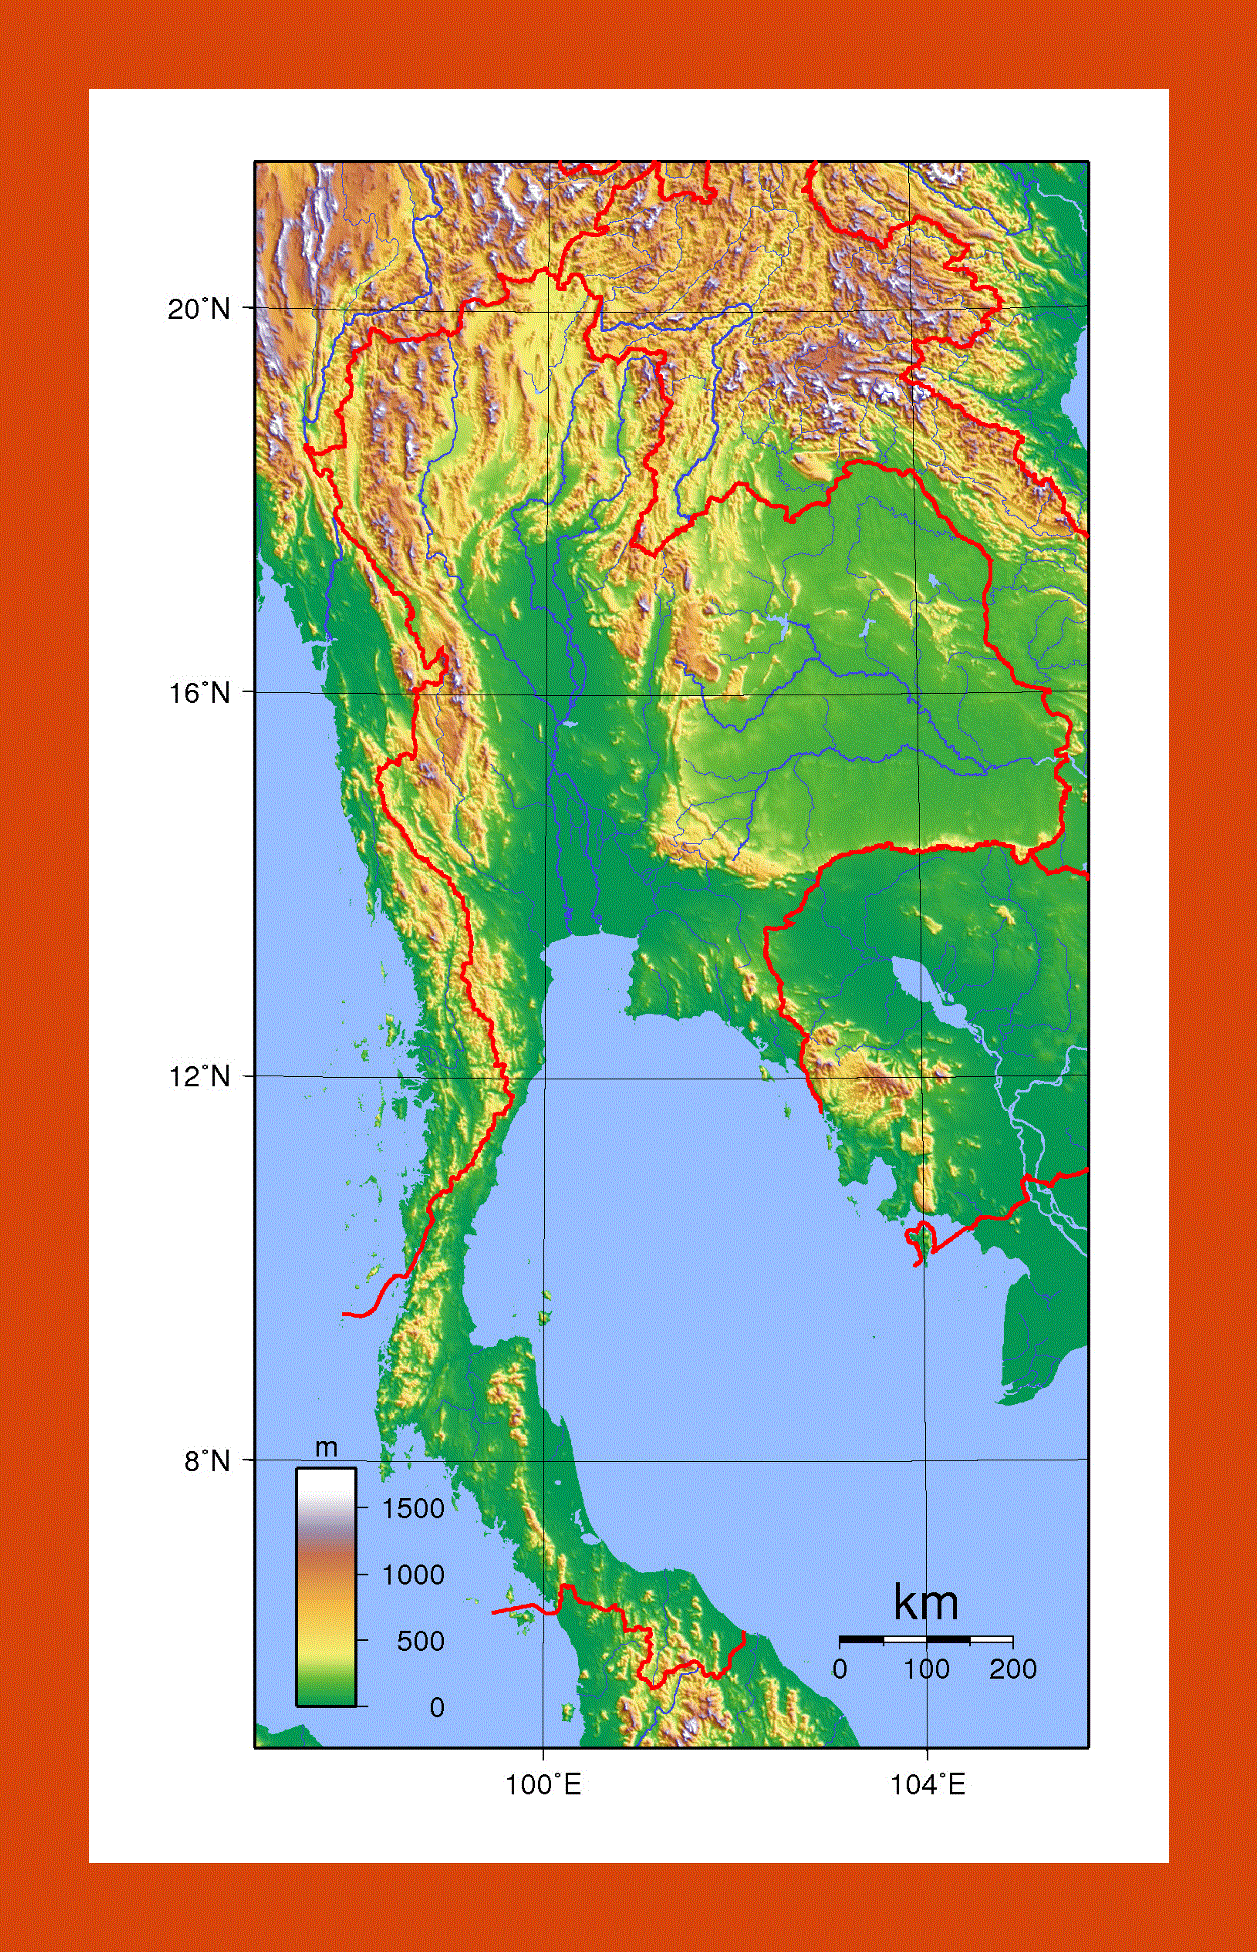 Topographical map of Thailand